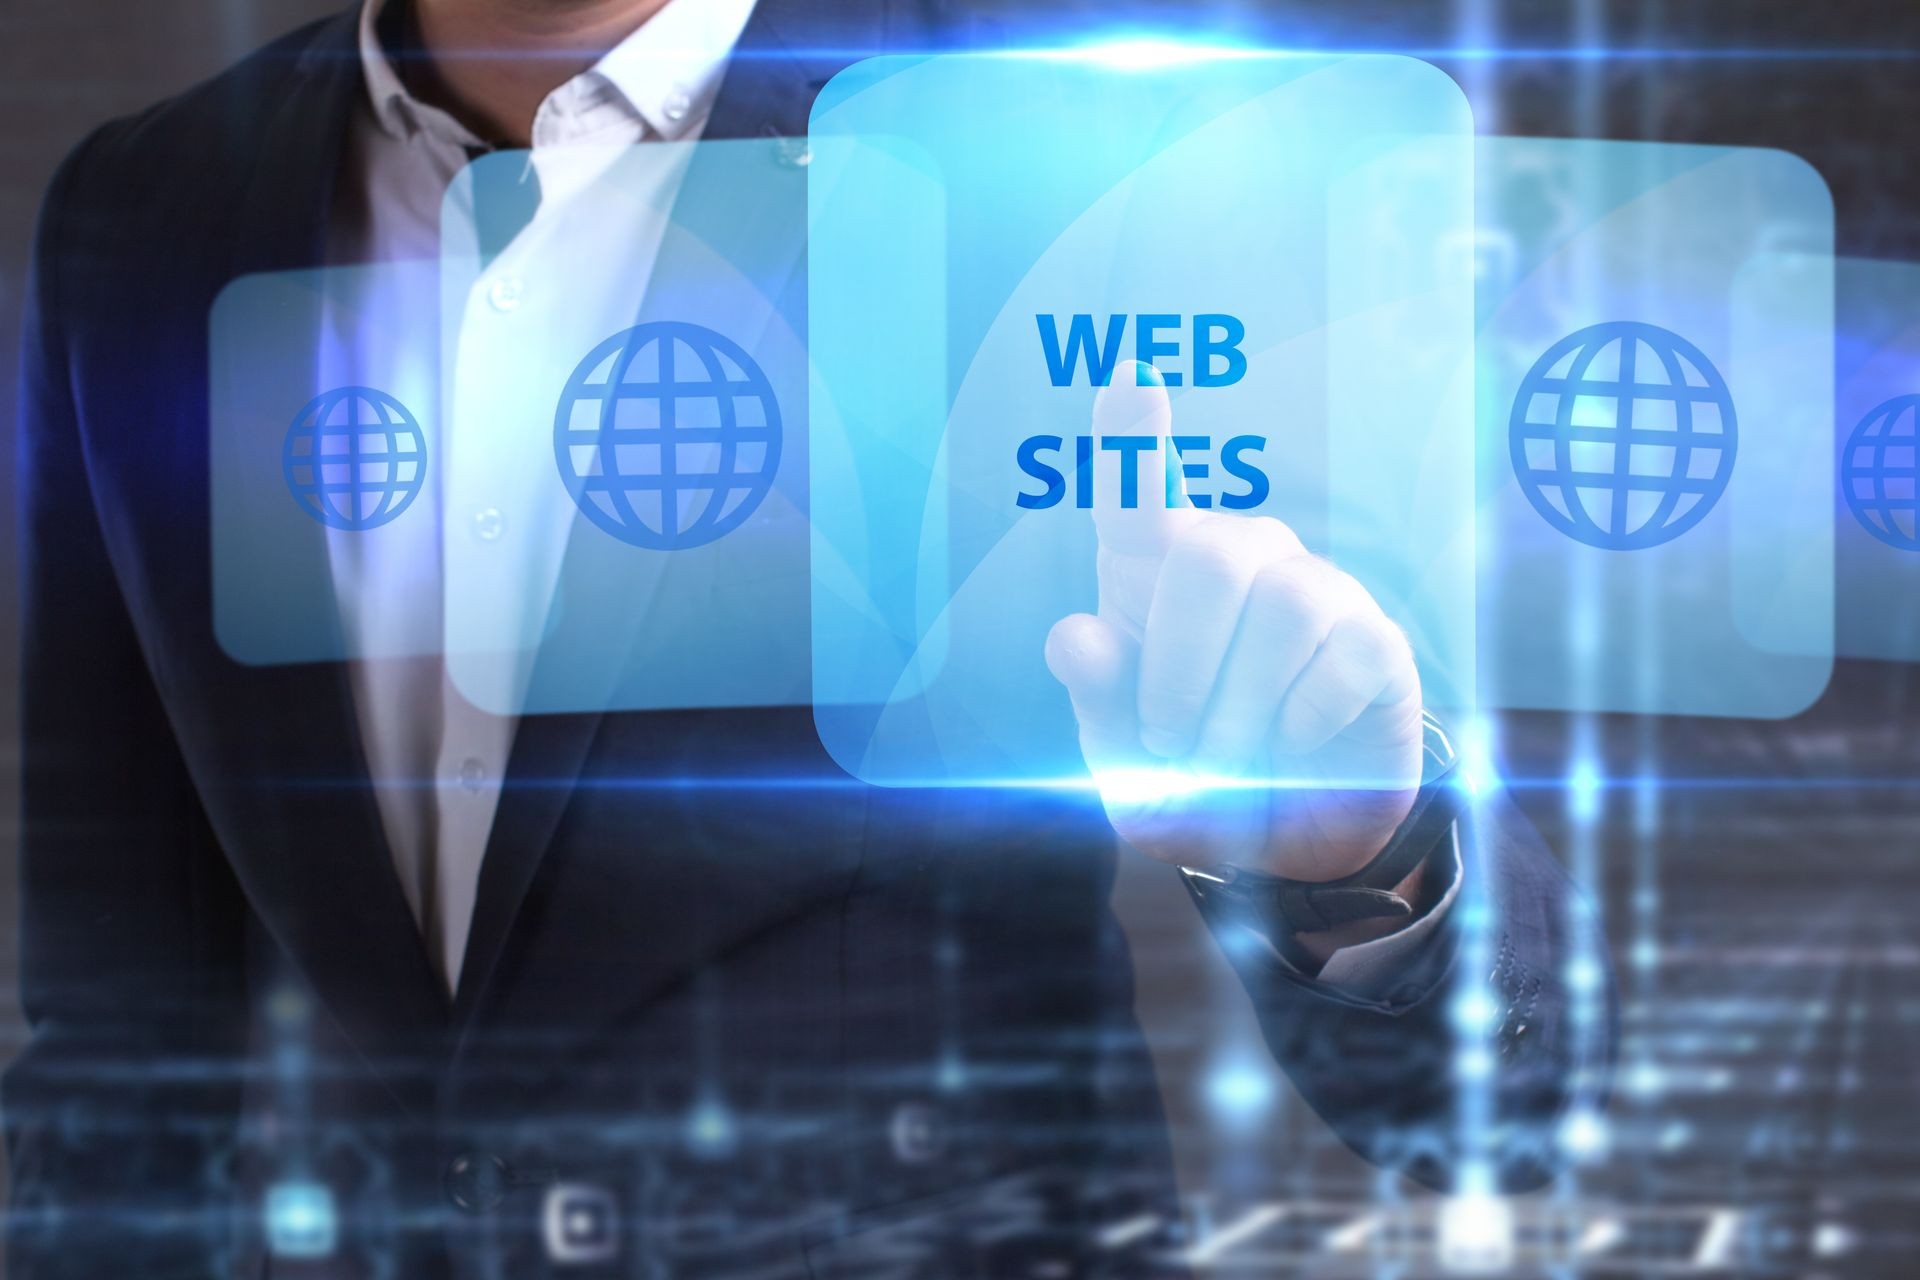 The concept of business, technology, the Internet and the network. The young entrepreneur has found what he needs: Web sites